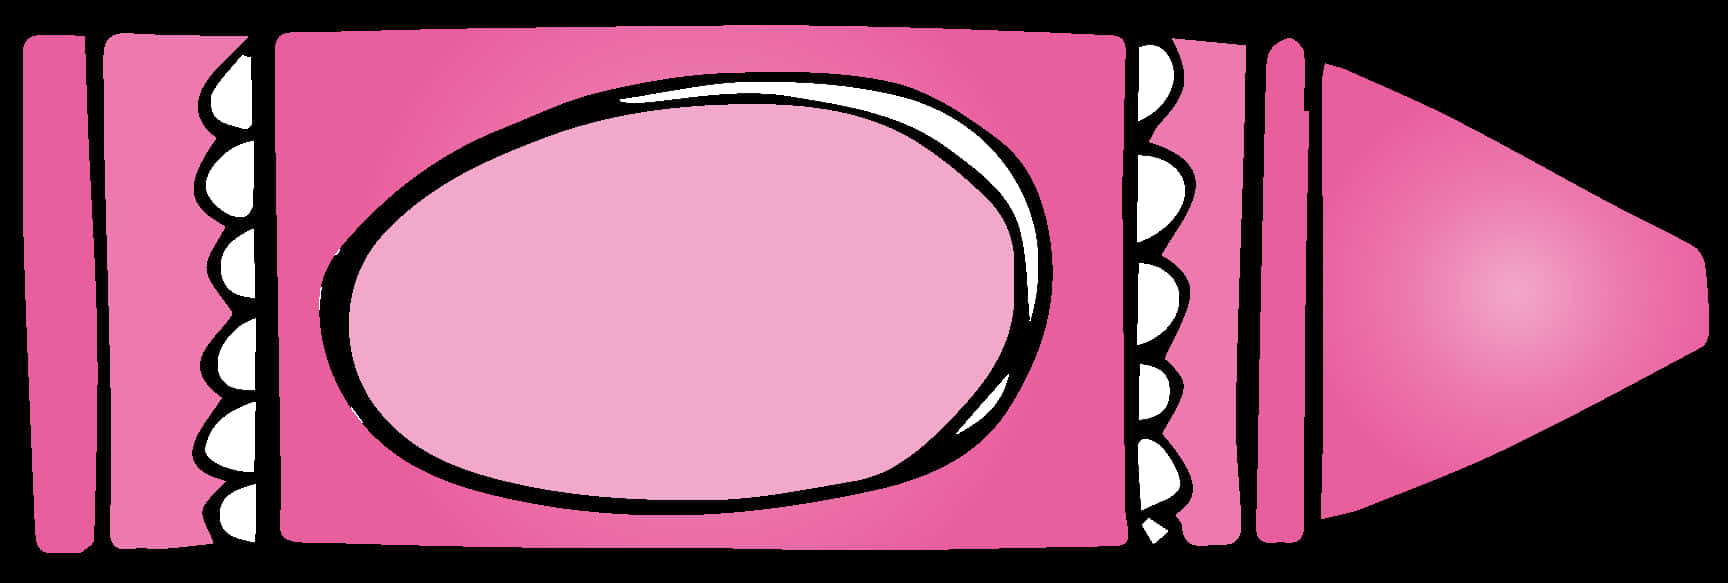 A Pink And White Rectangular Object With A Black Border